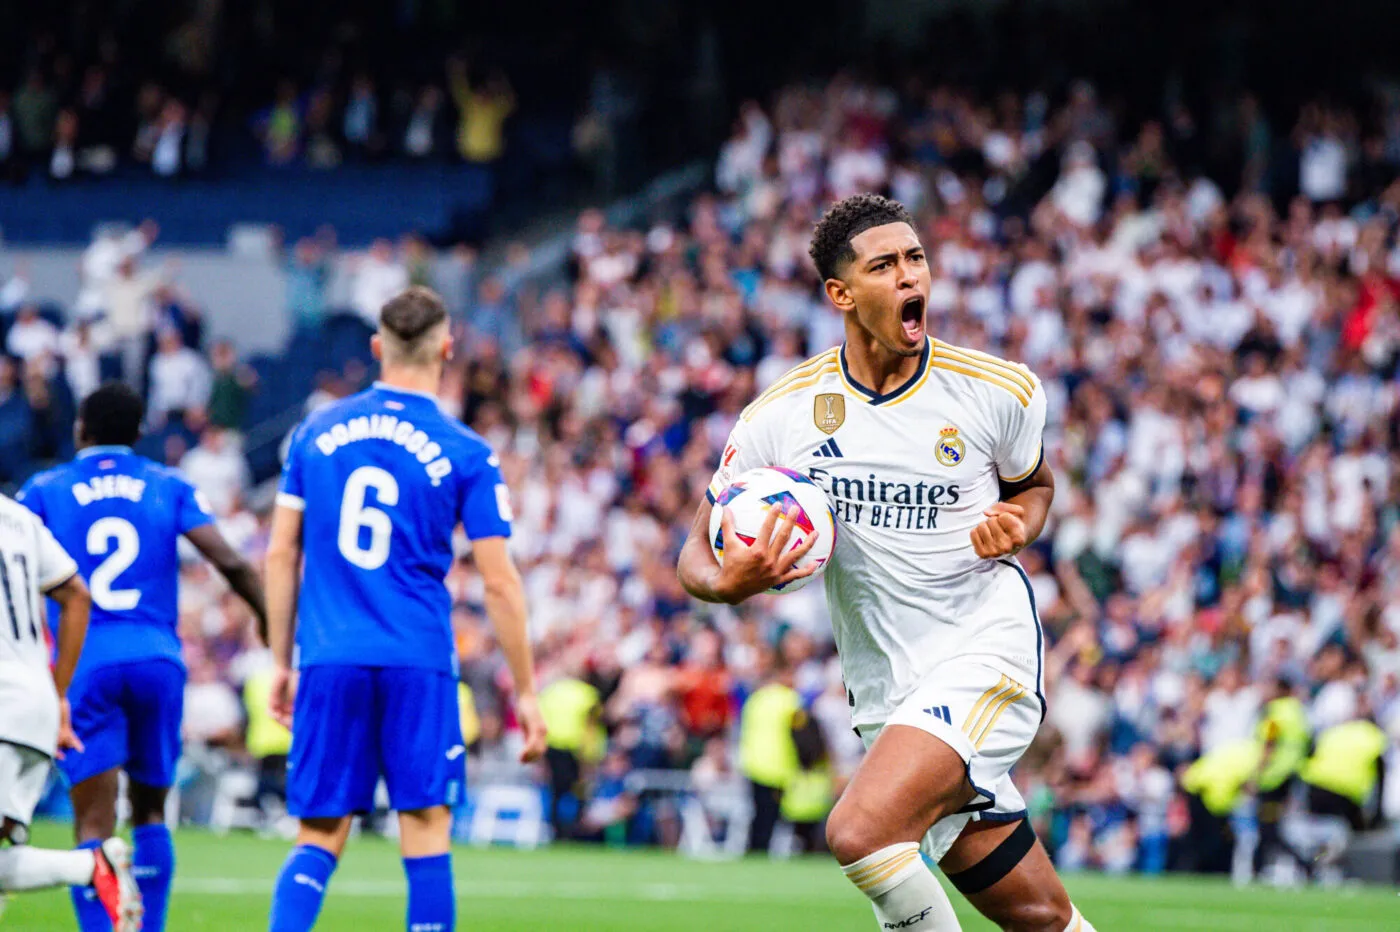 Jude Bellingham (Real Madrid) celebrates a goal during the LaLiga EA Sports football match between Real Madrid vs Getafe played at Bernabeu stadium. Final score; Real Madrid 2:1 Getafe (Photo by Alberto Gardin / SOPA Images/Sipa USA) - Photo by Icon sport